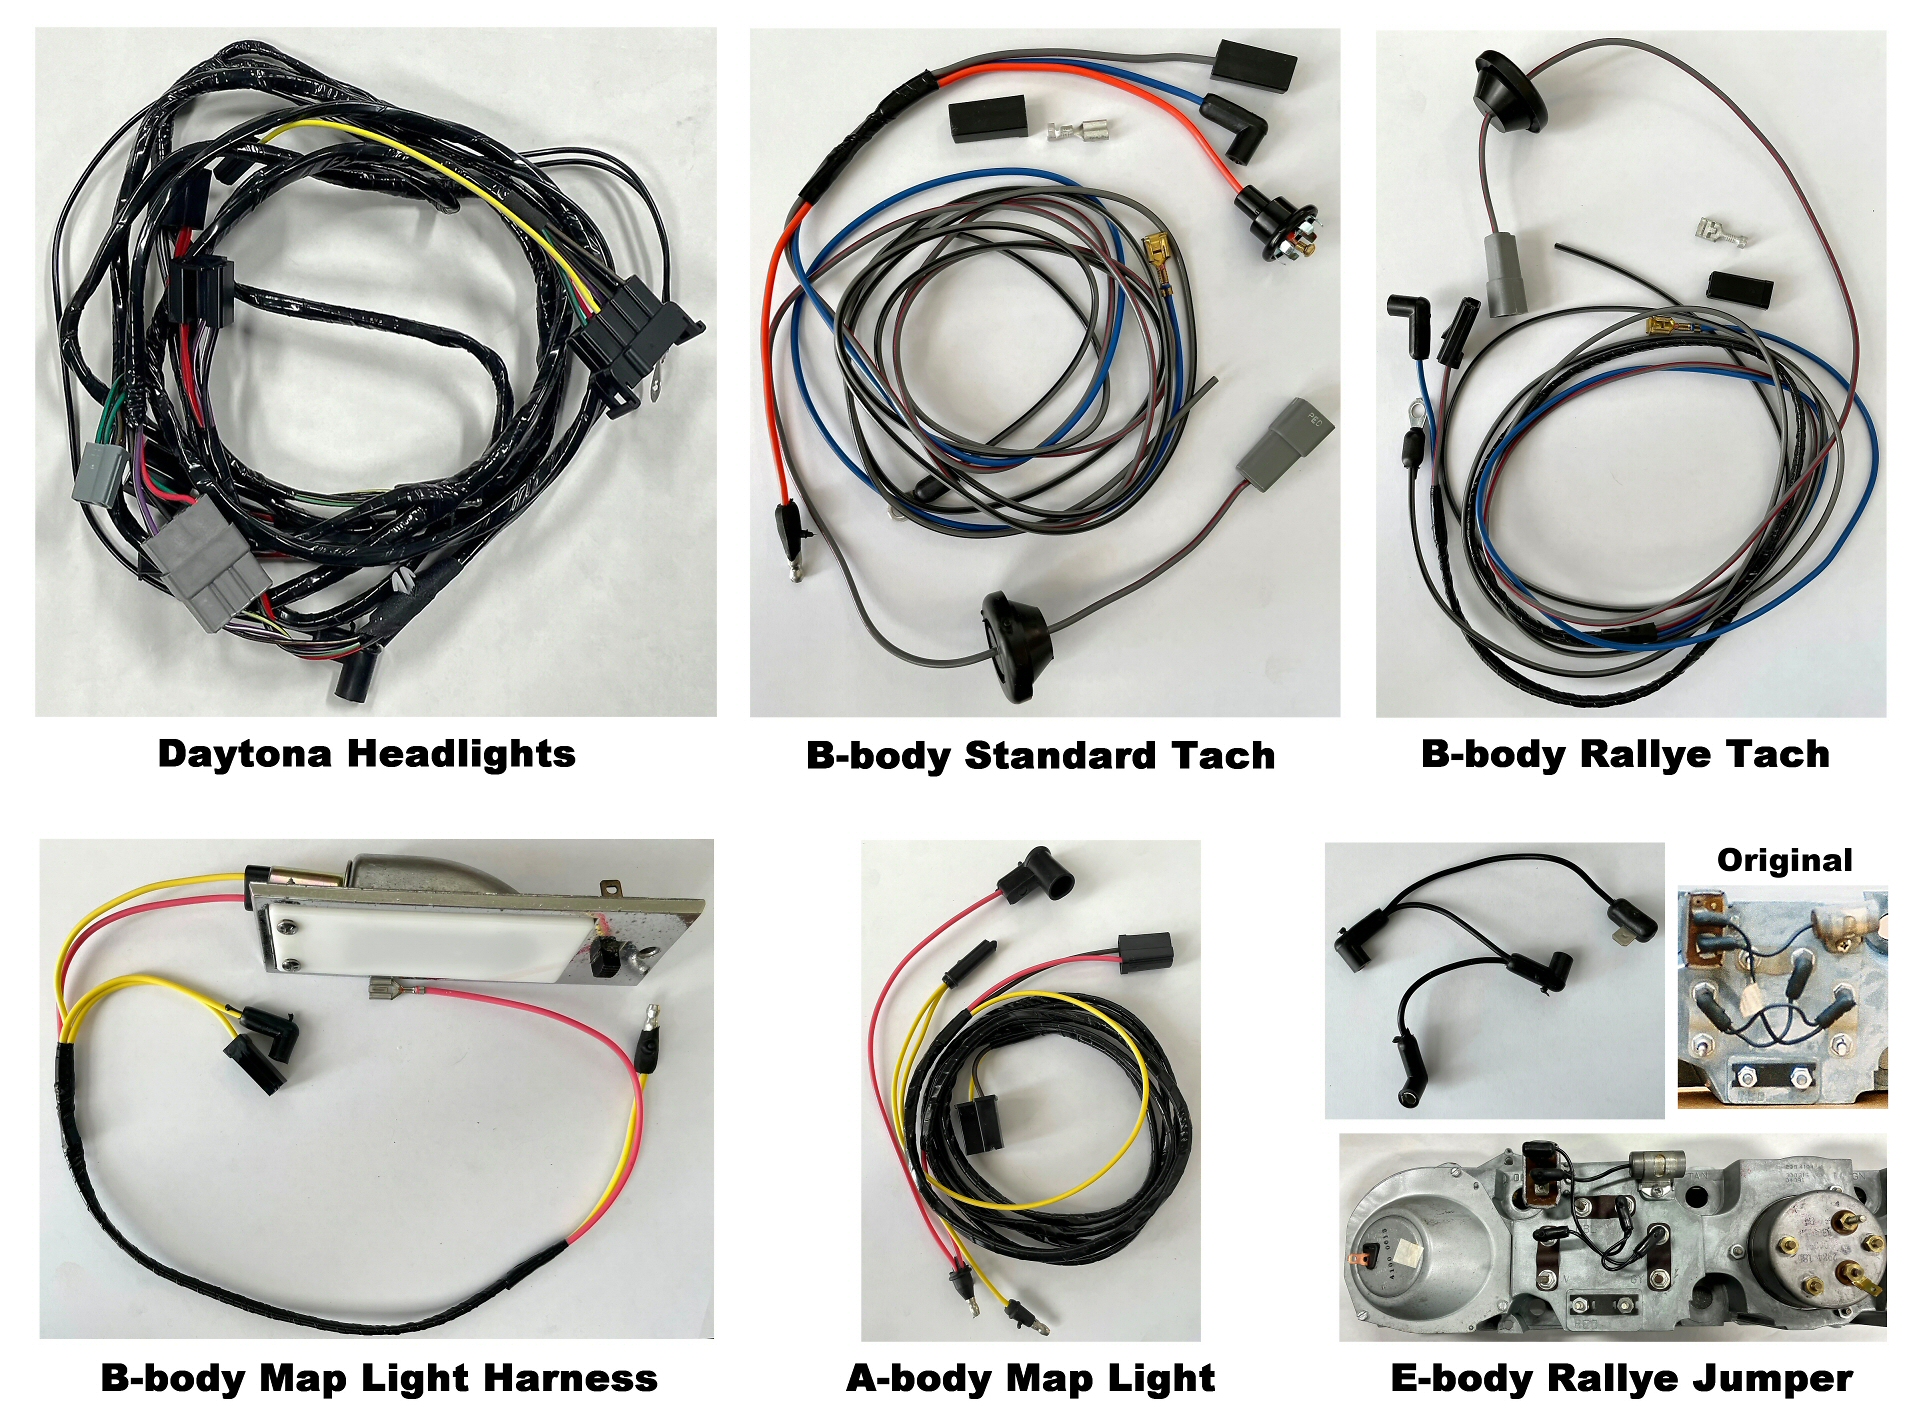 http://www.performancecargraphics.com/images/Wiring_Harnesses/Wiring_Harness_Composite.jpg